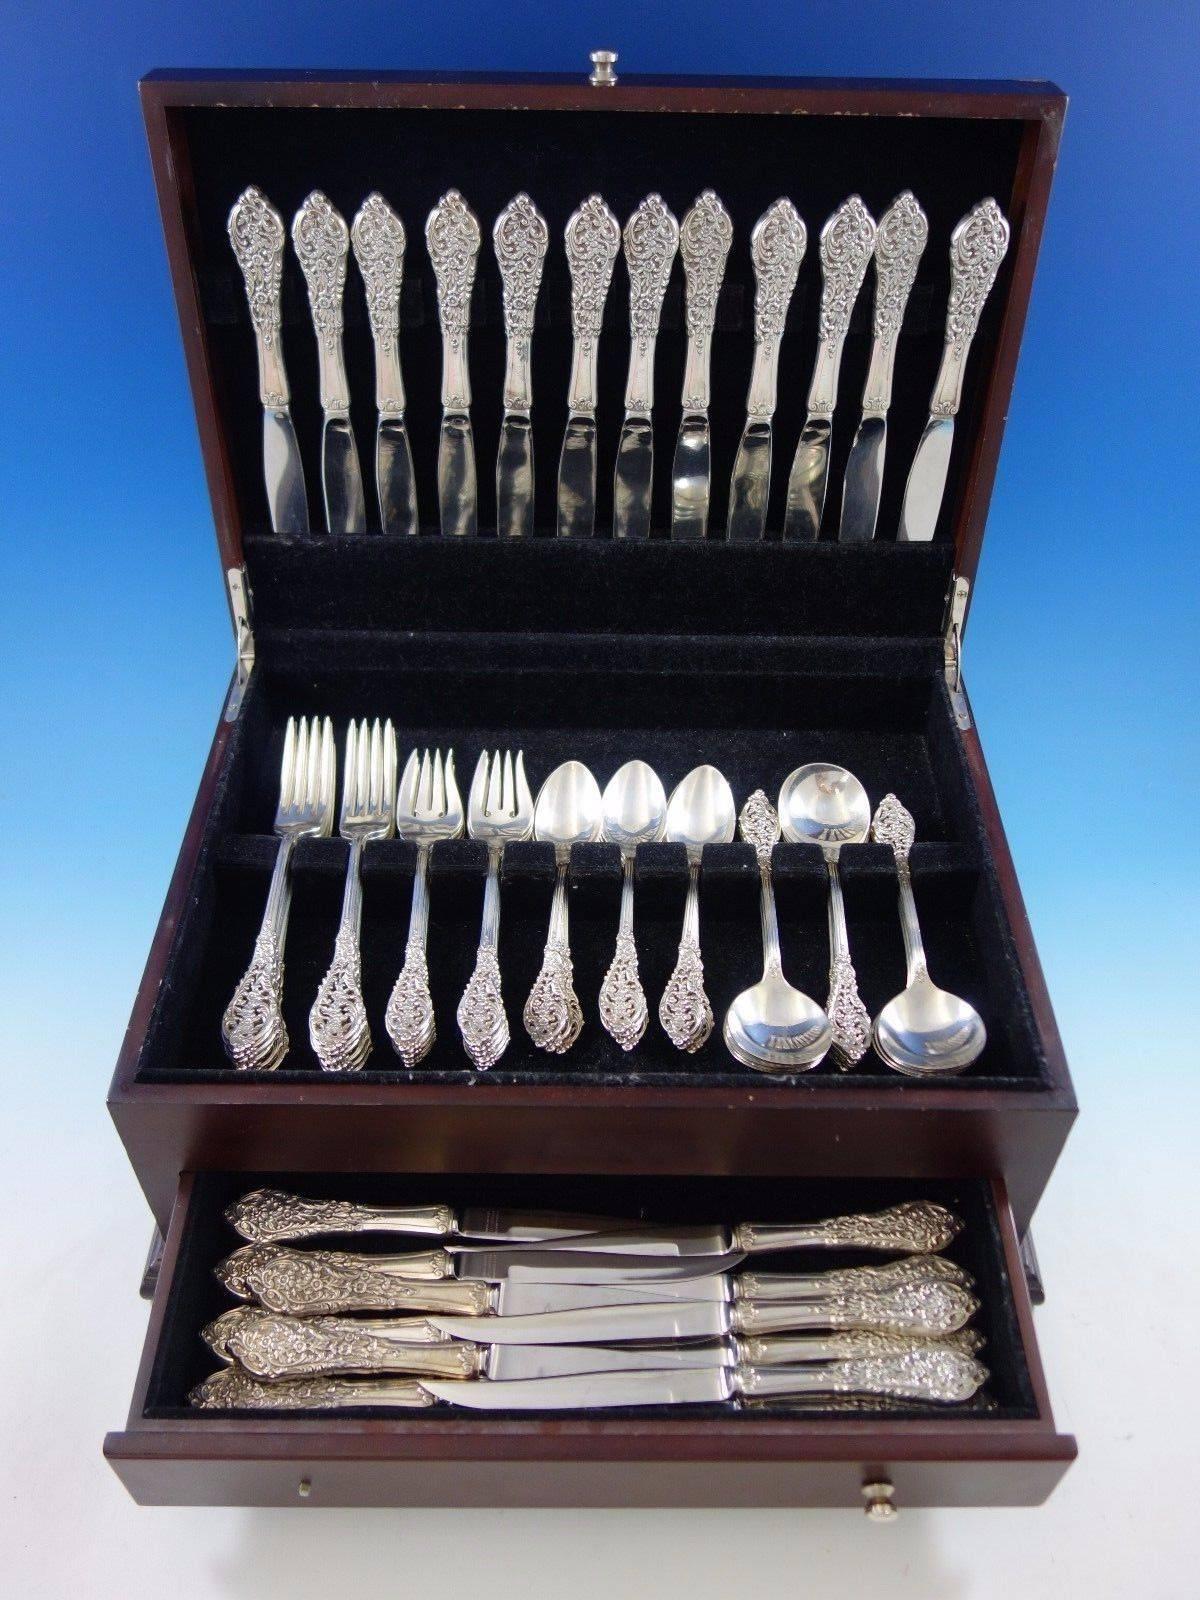 Florentine Lace by Reed & Barton sterling silver flatware set, 72 pieces. This set includes: 

12 knives, 9